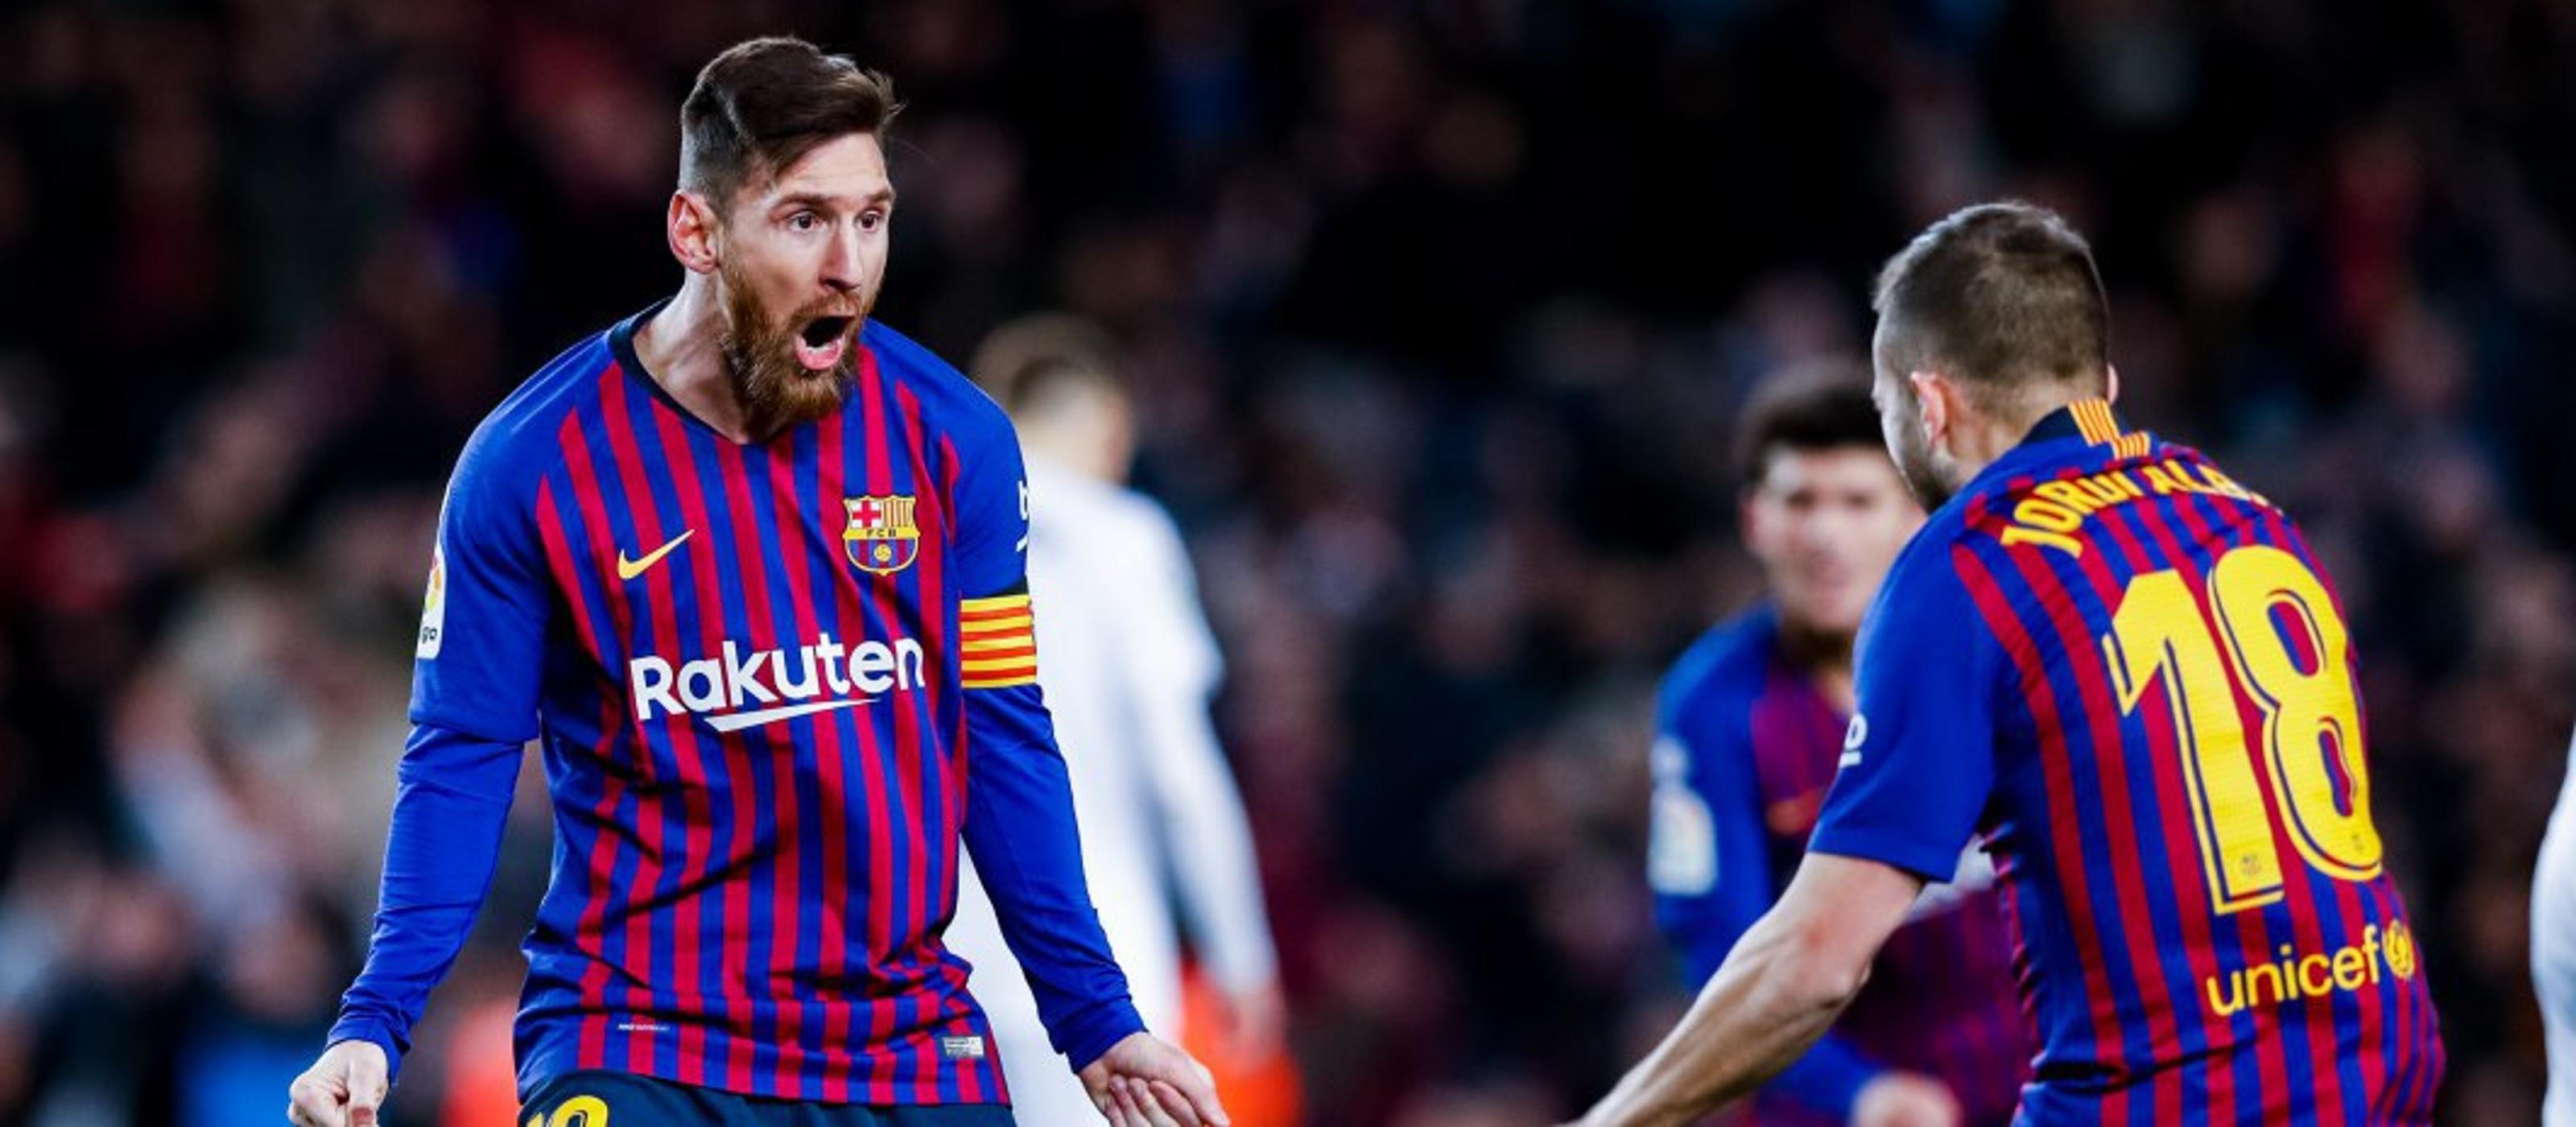 Leo Messi scores twice against Valencia (by FCB)